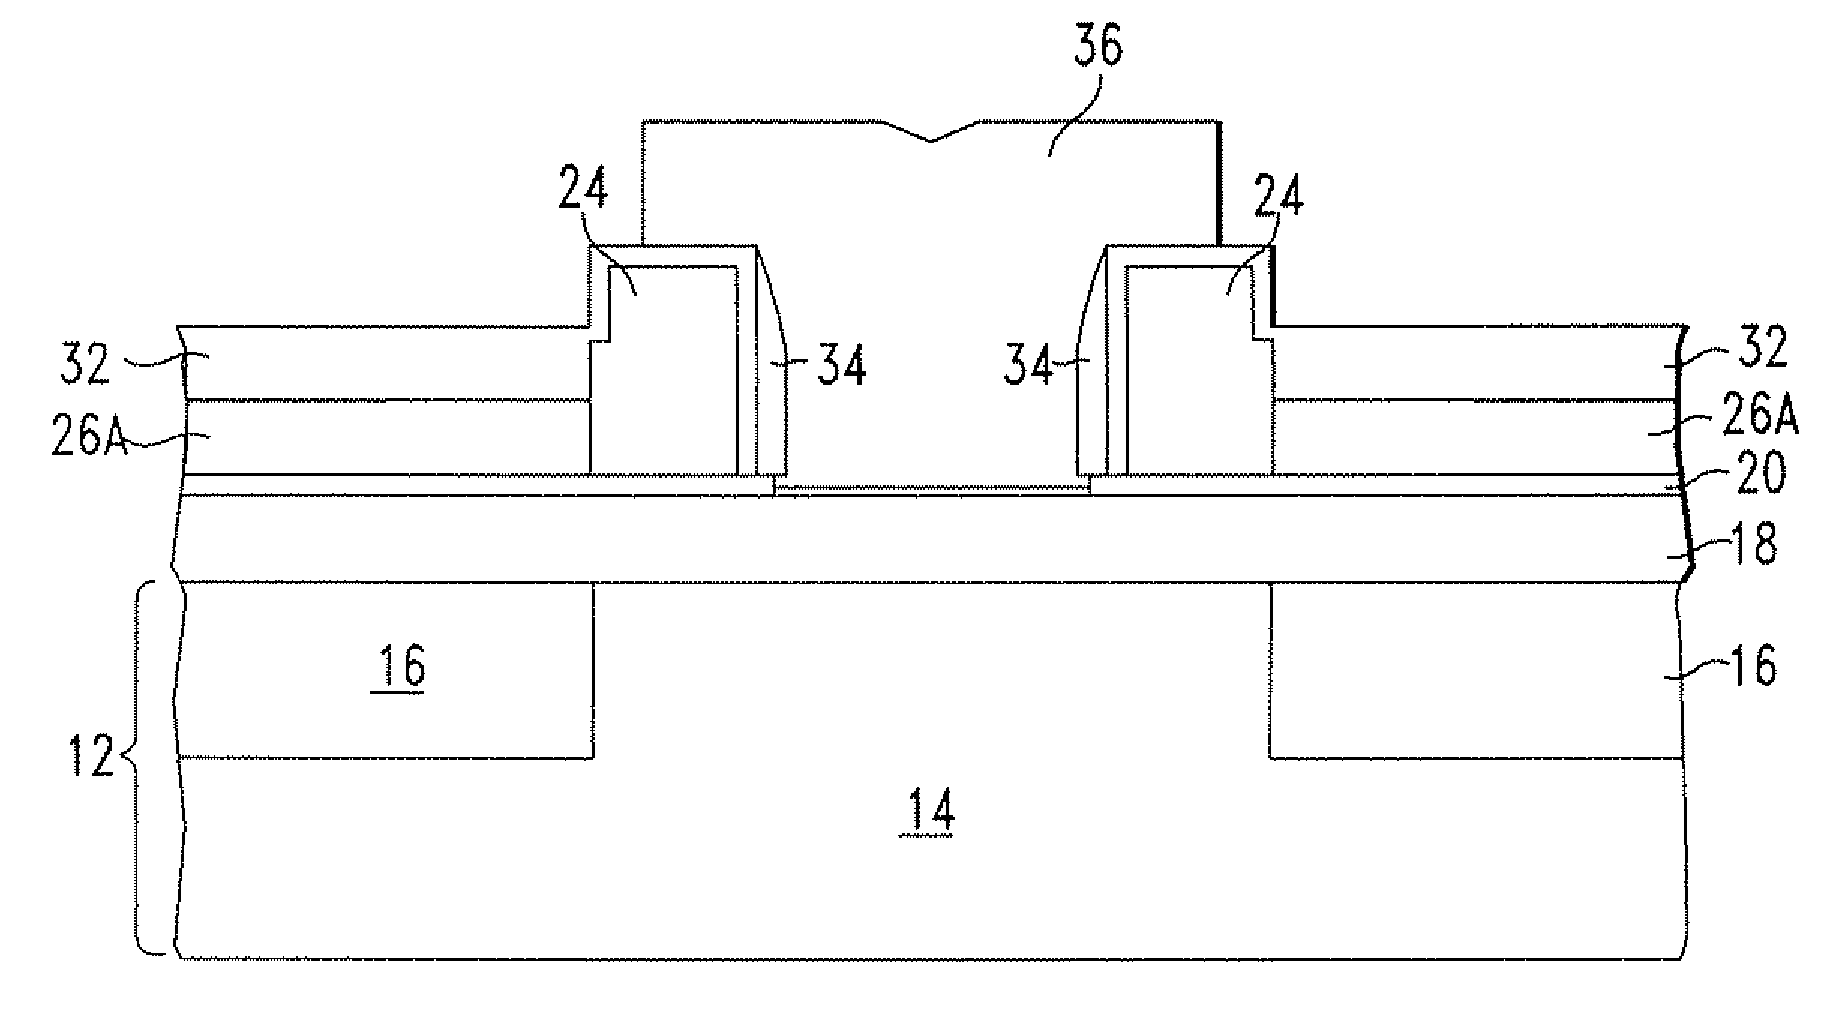 Method to build self-aligned NPN in advanced BiCMOS technology